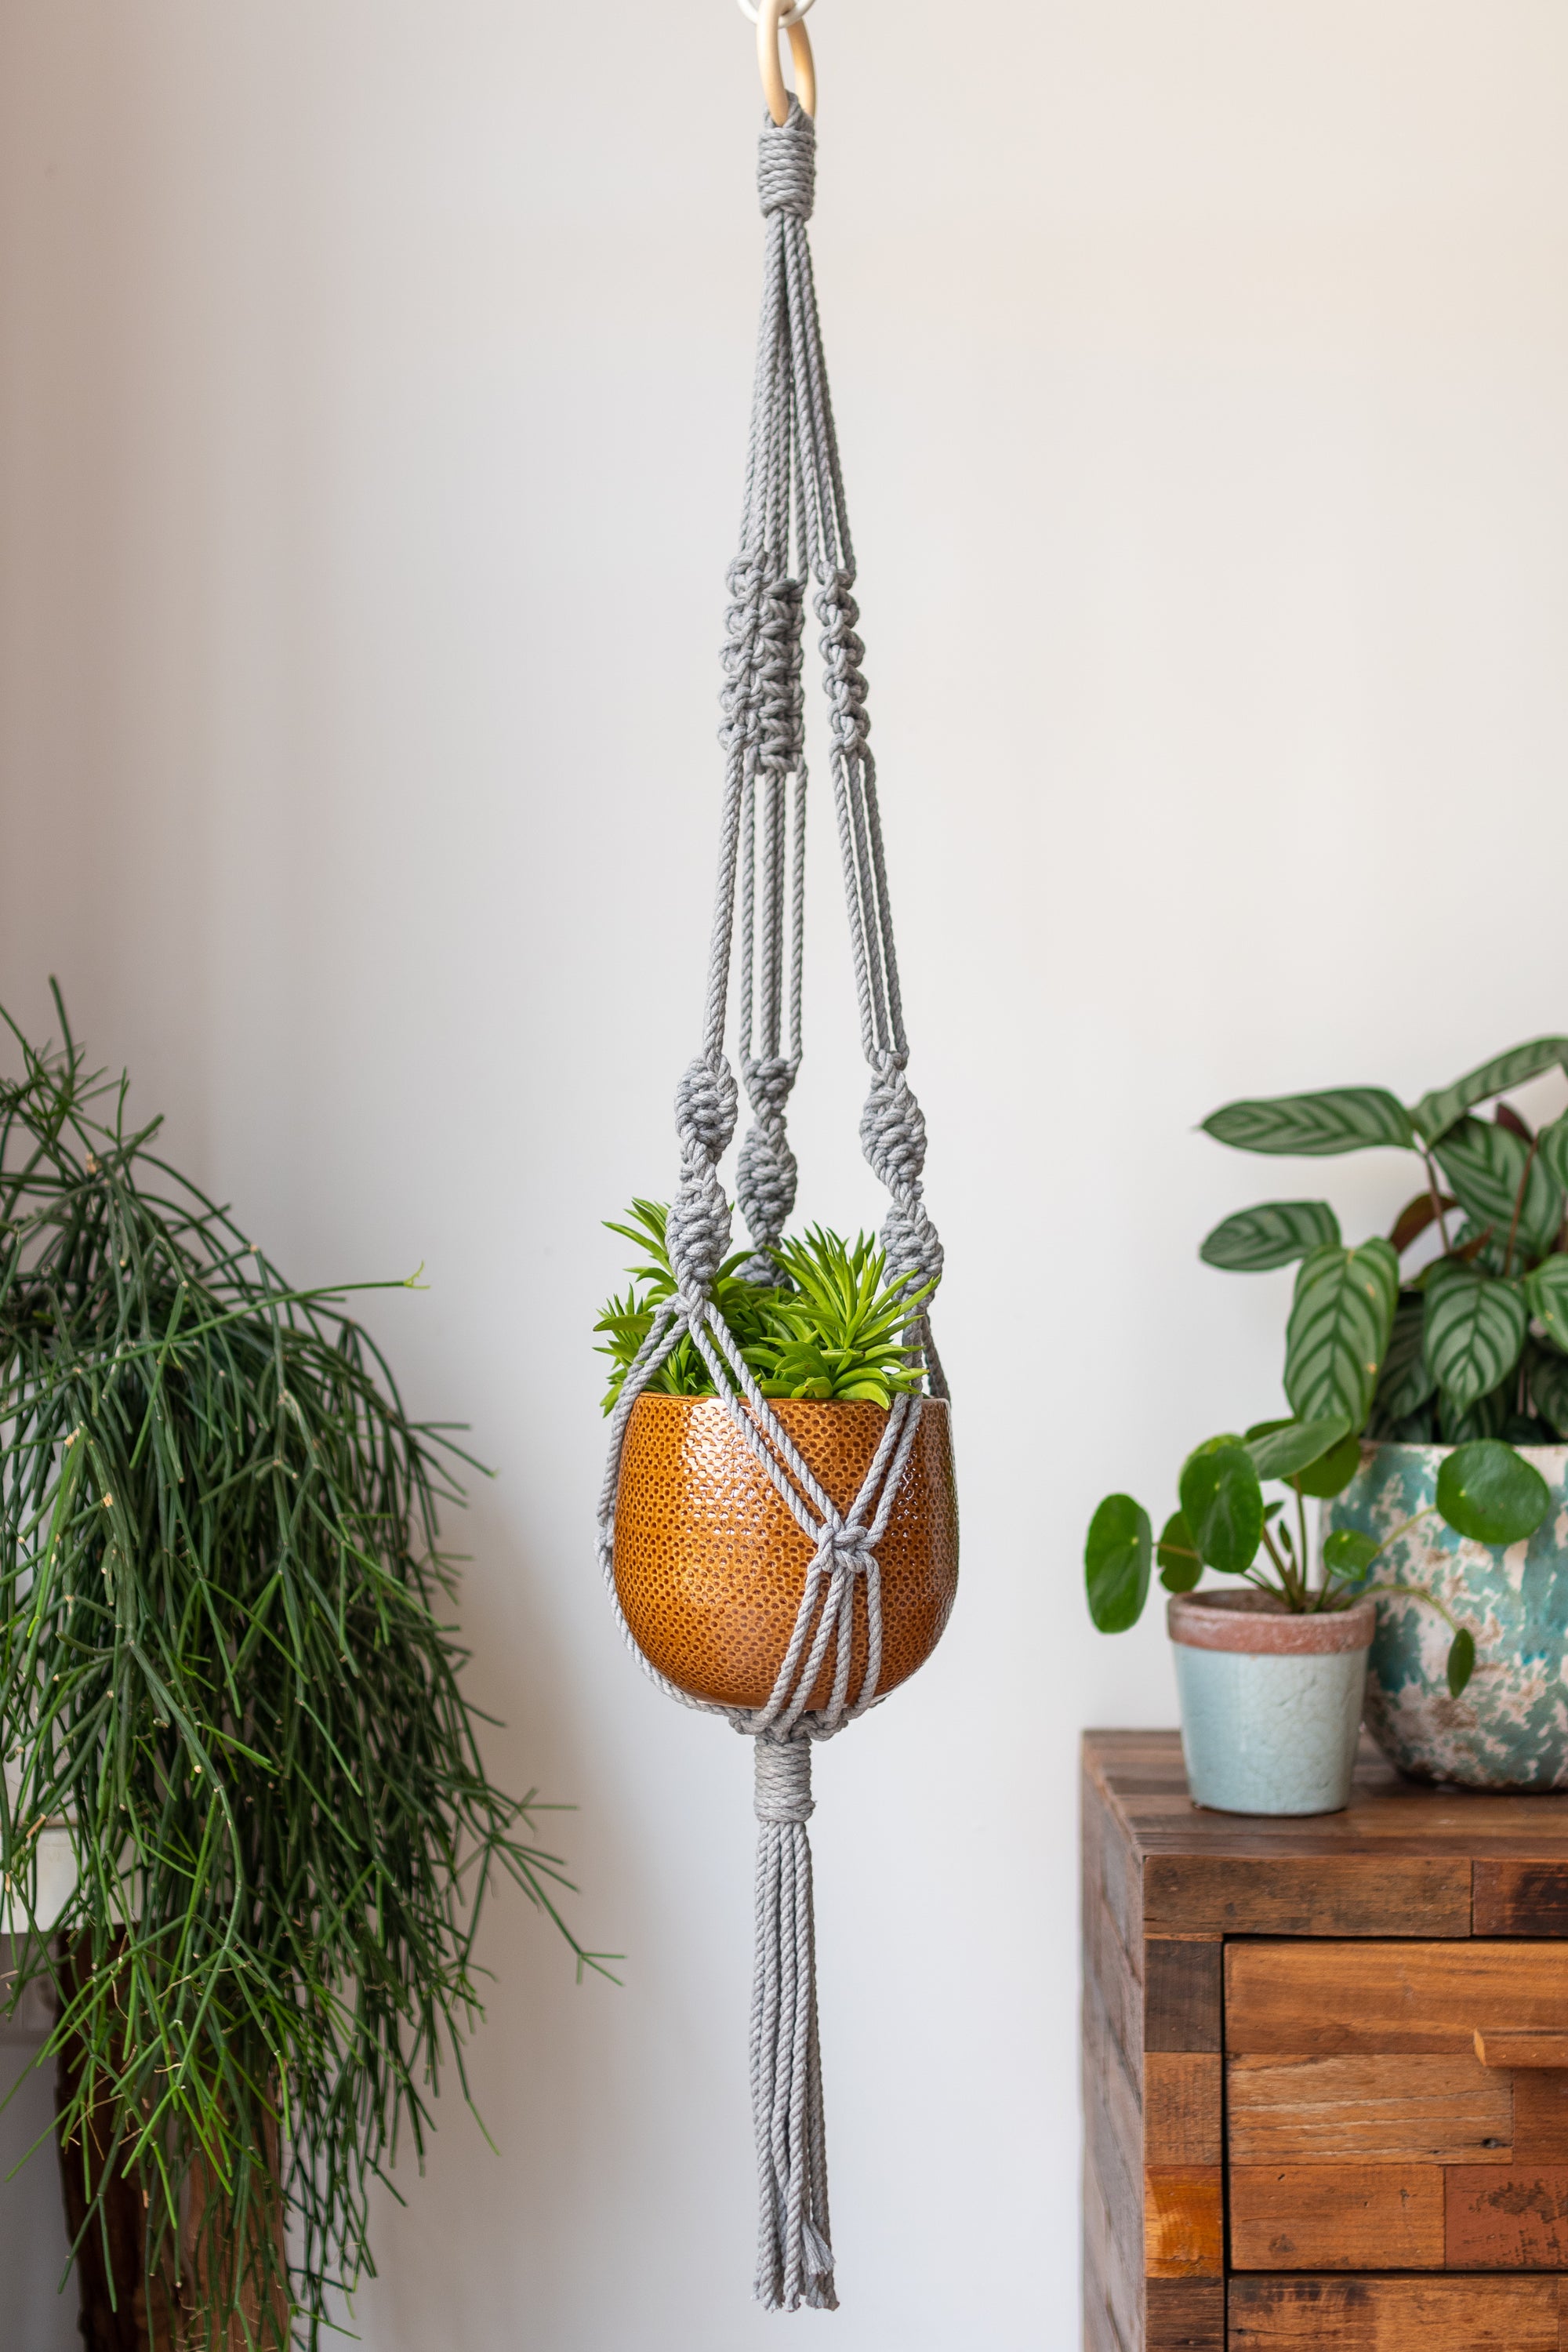 Knotted Plant Hangers